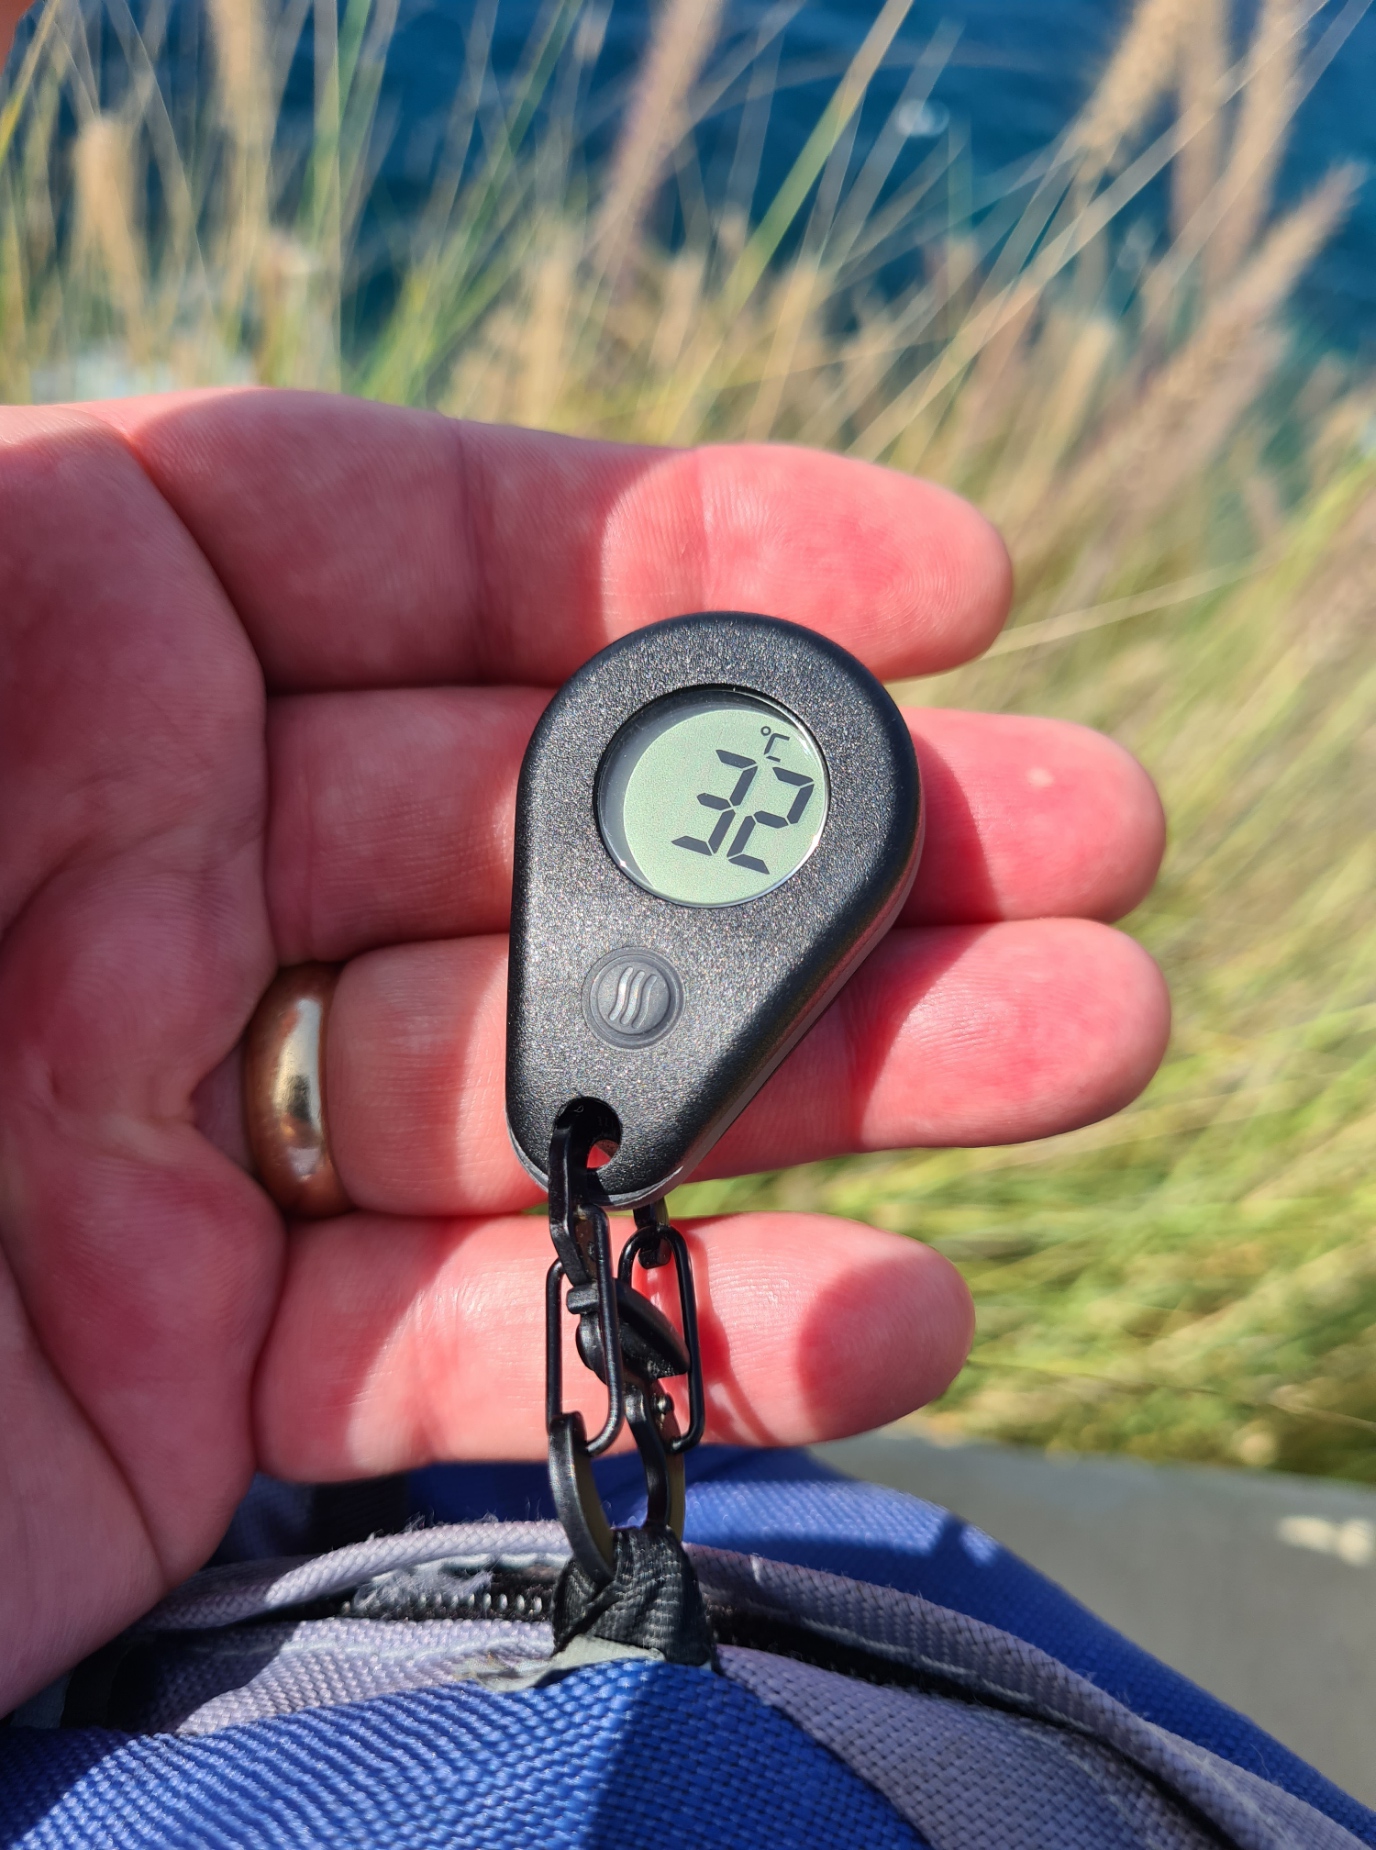 Best Keychain Mini Thermometer - Backpacking & Car Thermometer